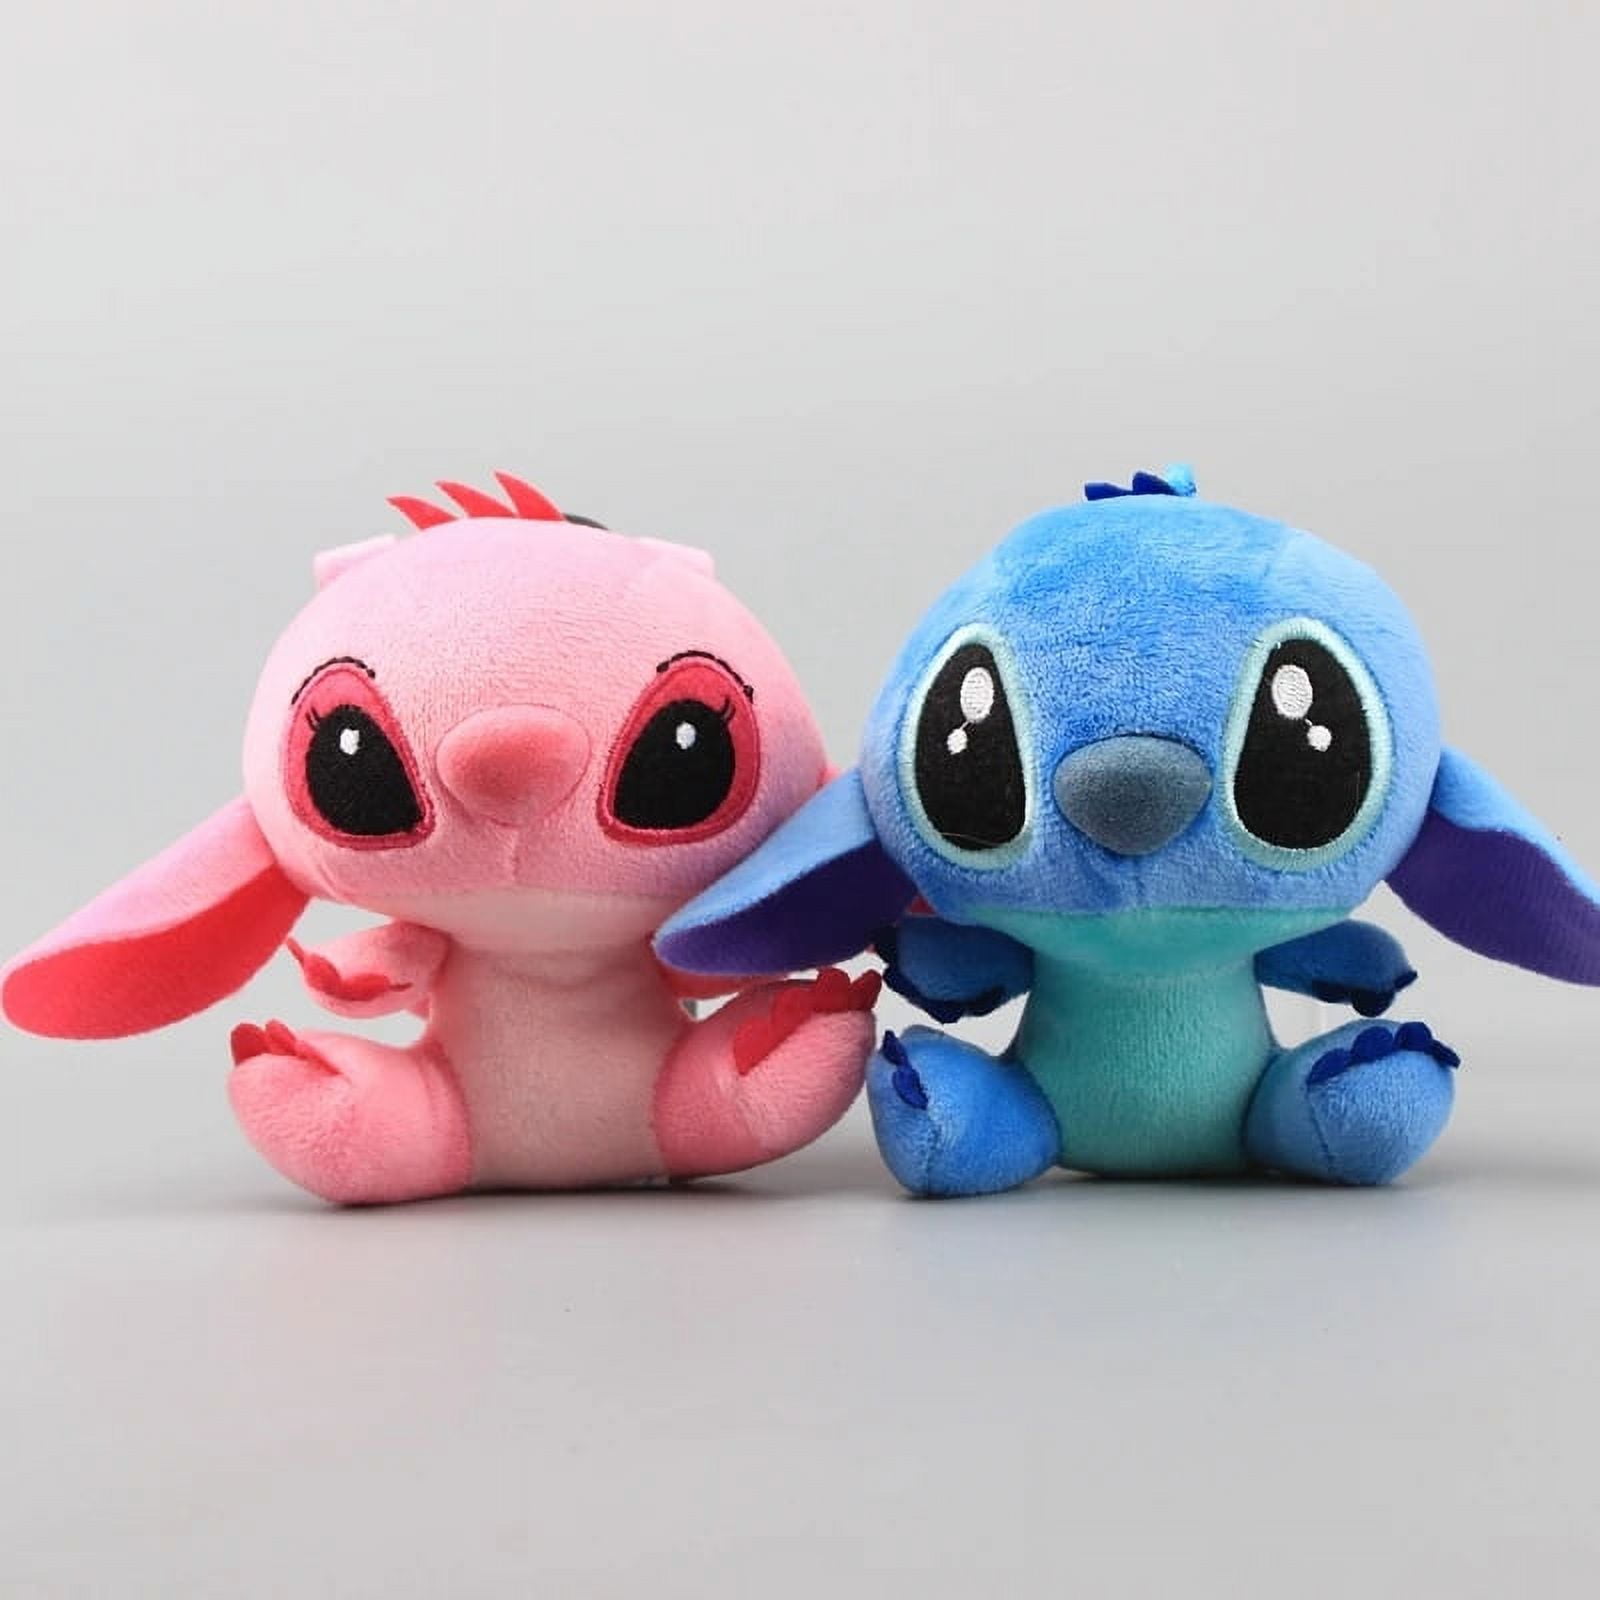 Stitch Stuffed Plush Toy Doll For Baby Children Kid Gifts